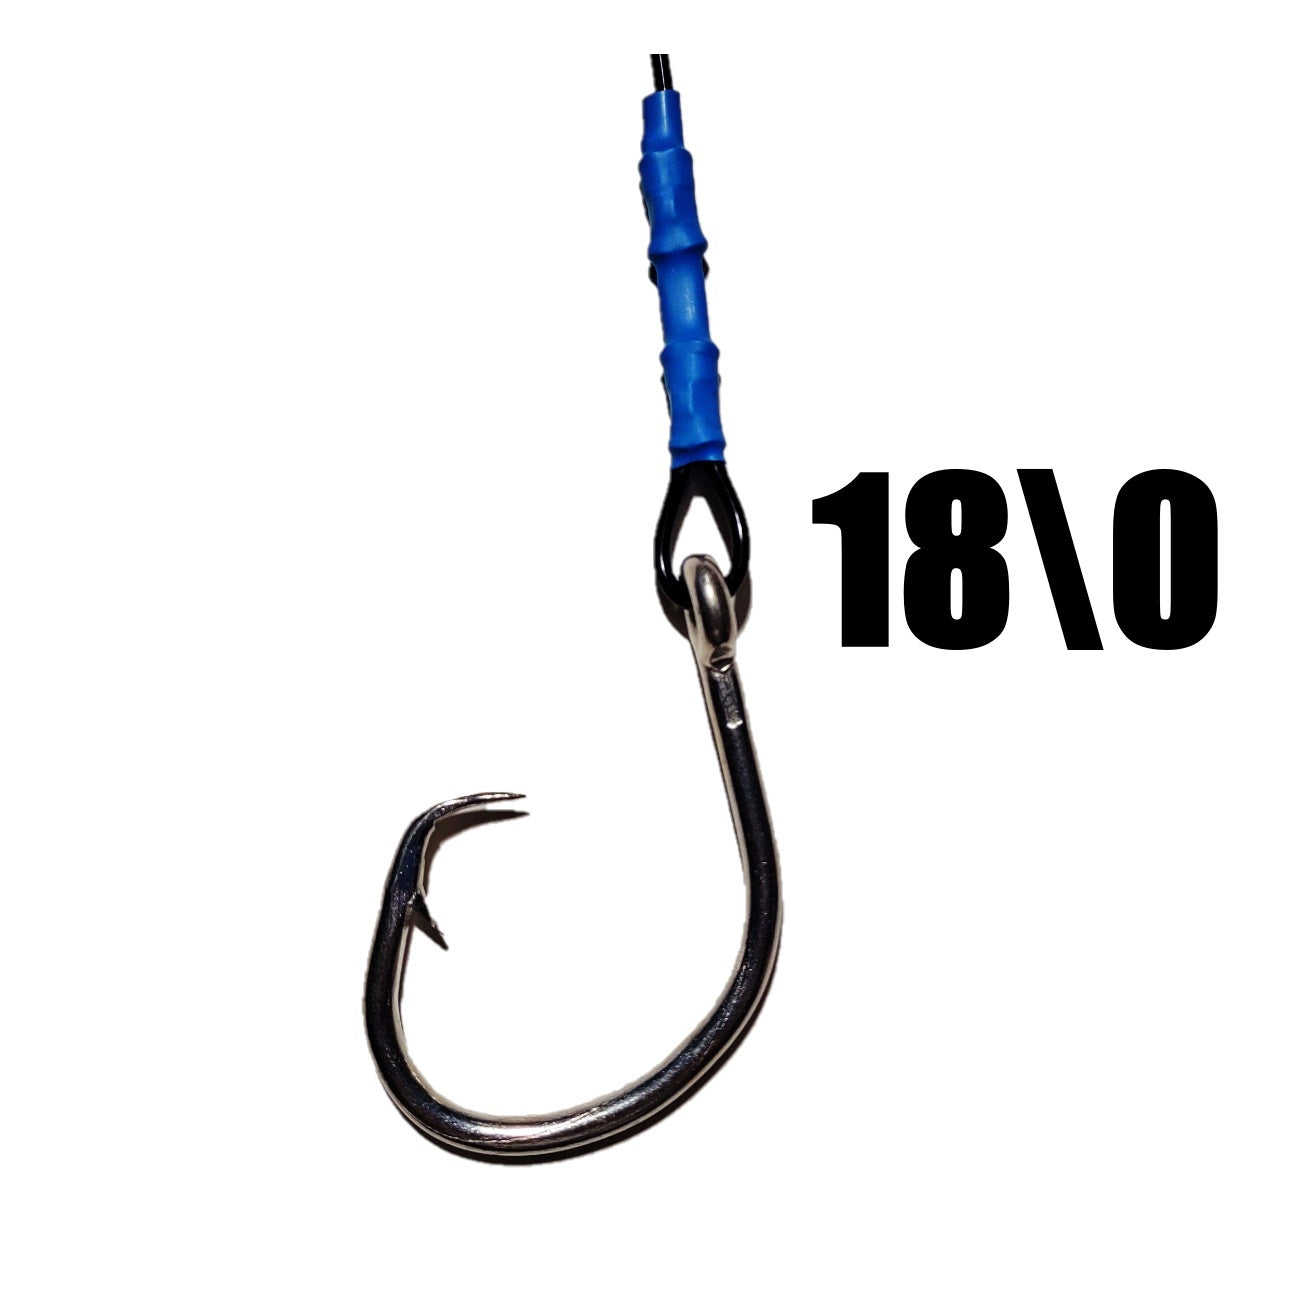 10 Foot - Cable and Mono Combo Shark Leader